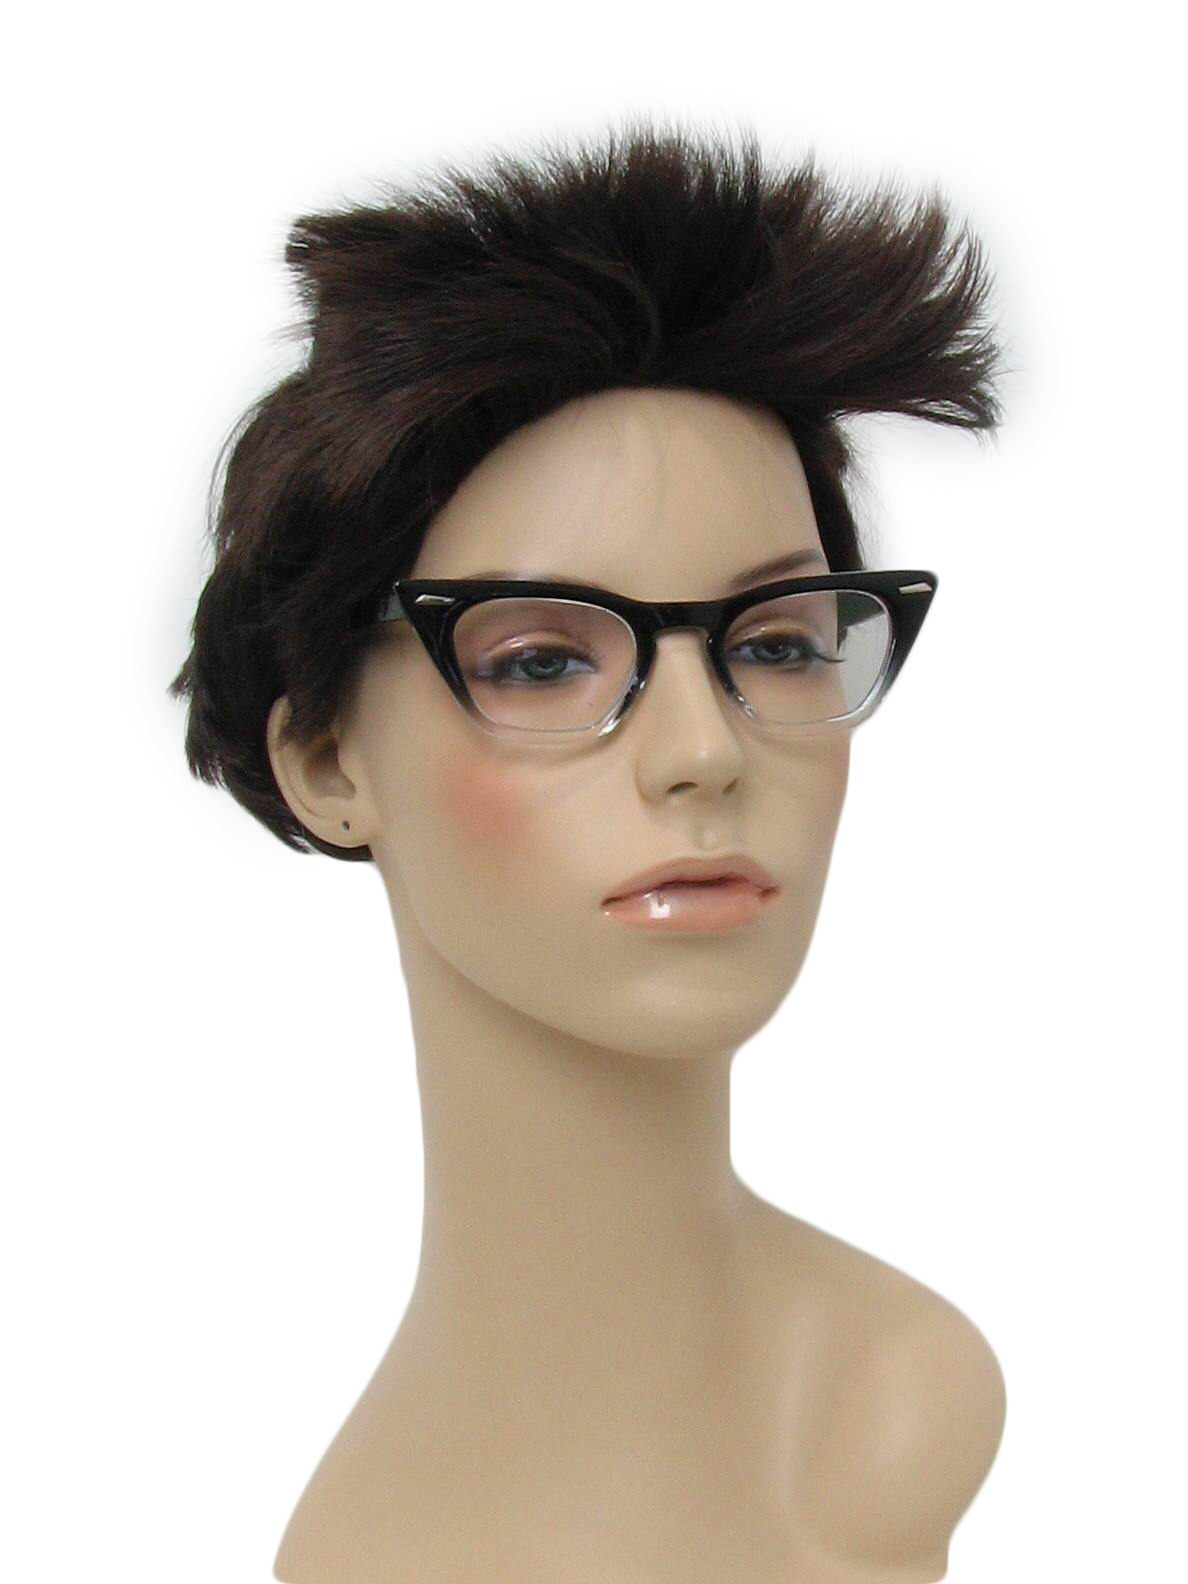 Vintage 50s Glasses 50s Style Made Recently Kiss Womens Black